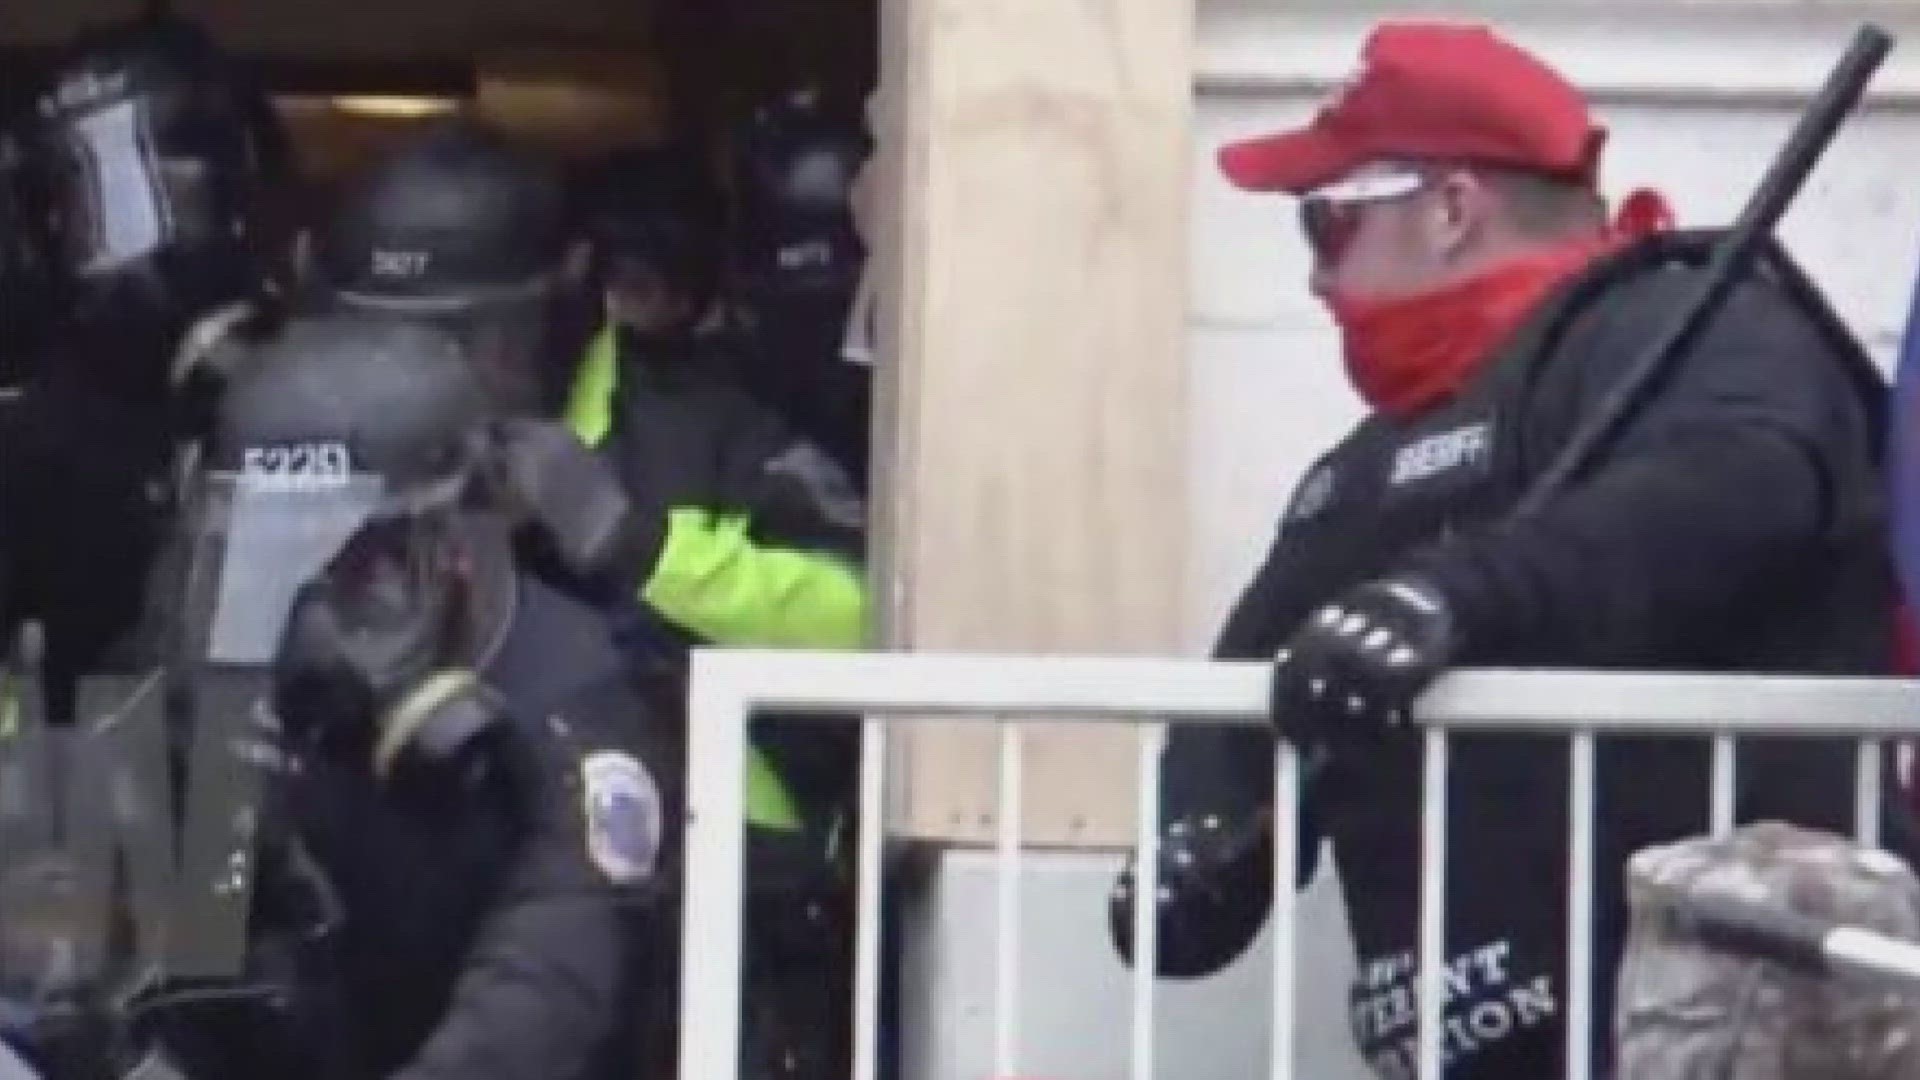 A man who was employed as a deputy when he assaulted police officers protecting the U.S. Capitol from a mob of Donald Trump supporters has been sentenced to prison.